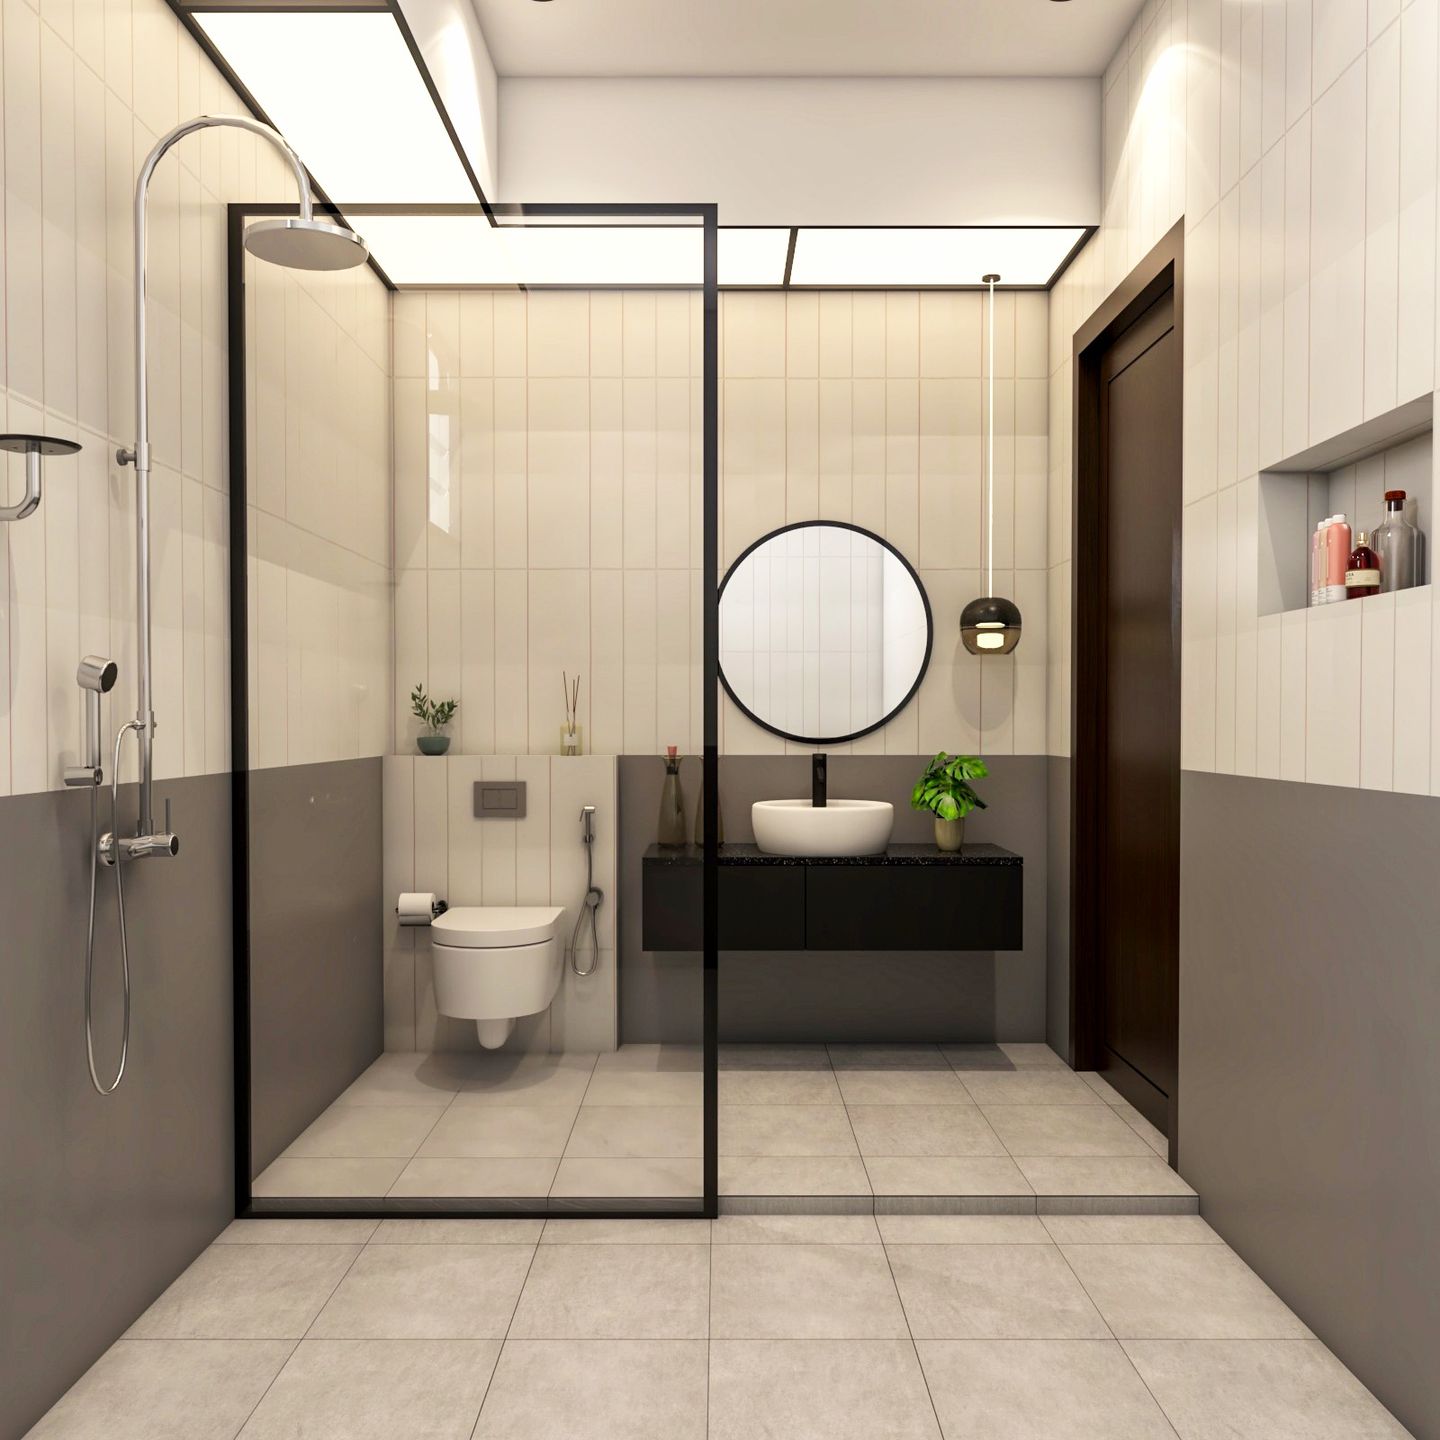 Compact Bathroom Design With A Round Mirror And Hanging Lights - Livspace